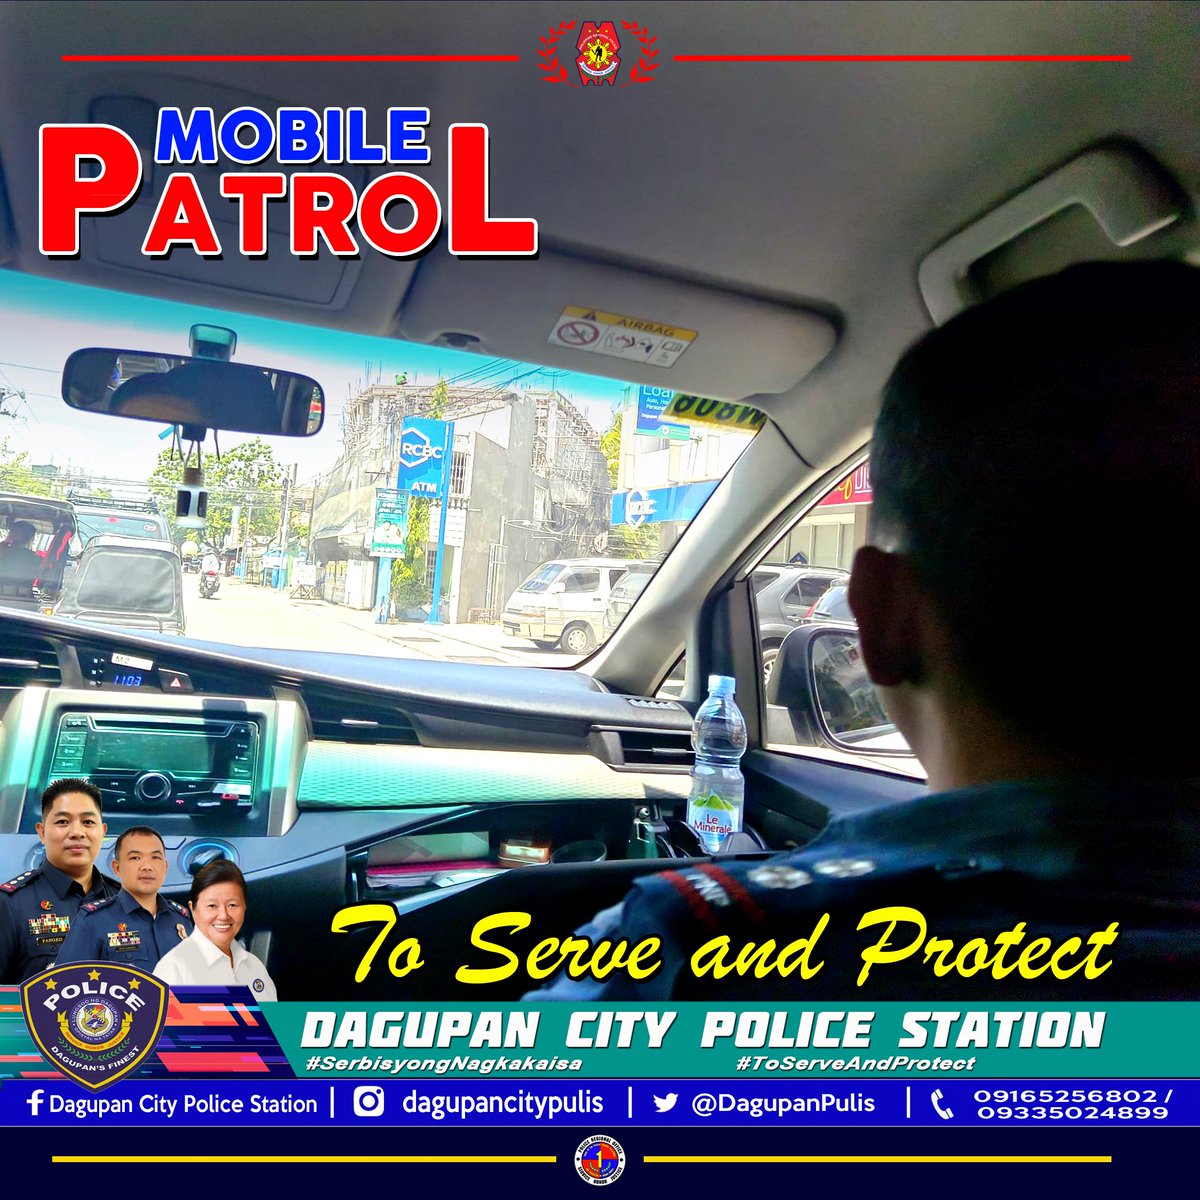 Dagupan City Police Station personnel, led by PLTCOL BRENDON B PALISOC, OIC, conducted mobile patrol within the area of responsibility to keep our community safe and crime-free and to make sure all road users stay safe. #SerbisyongNagkakaisa #ToServeandProtect